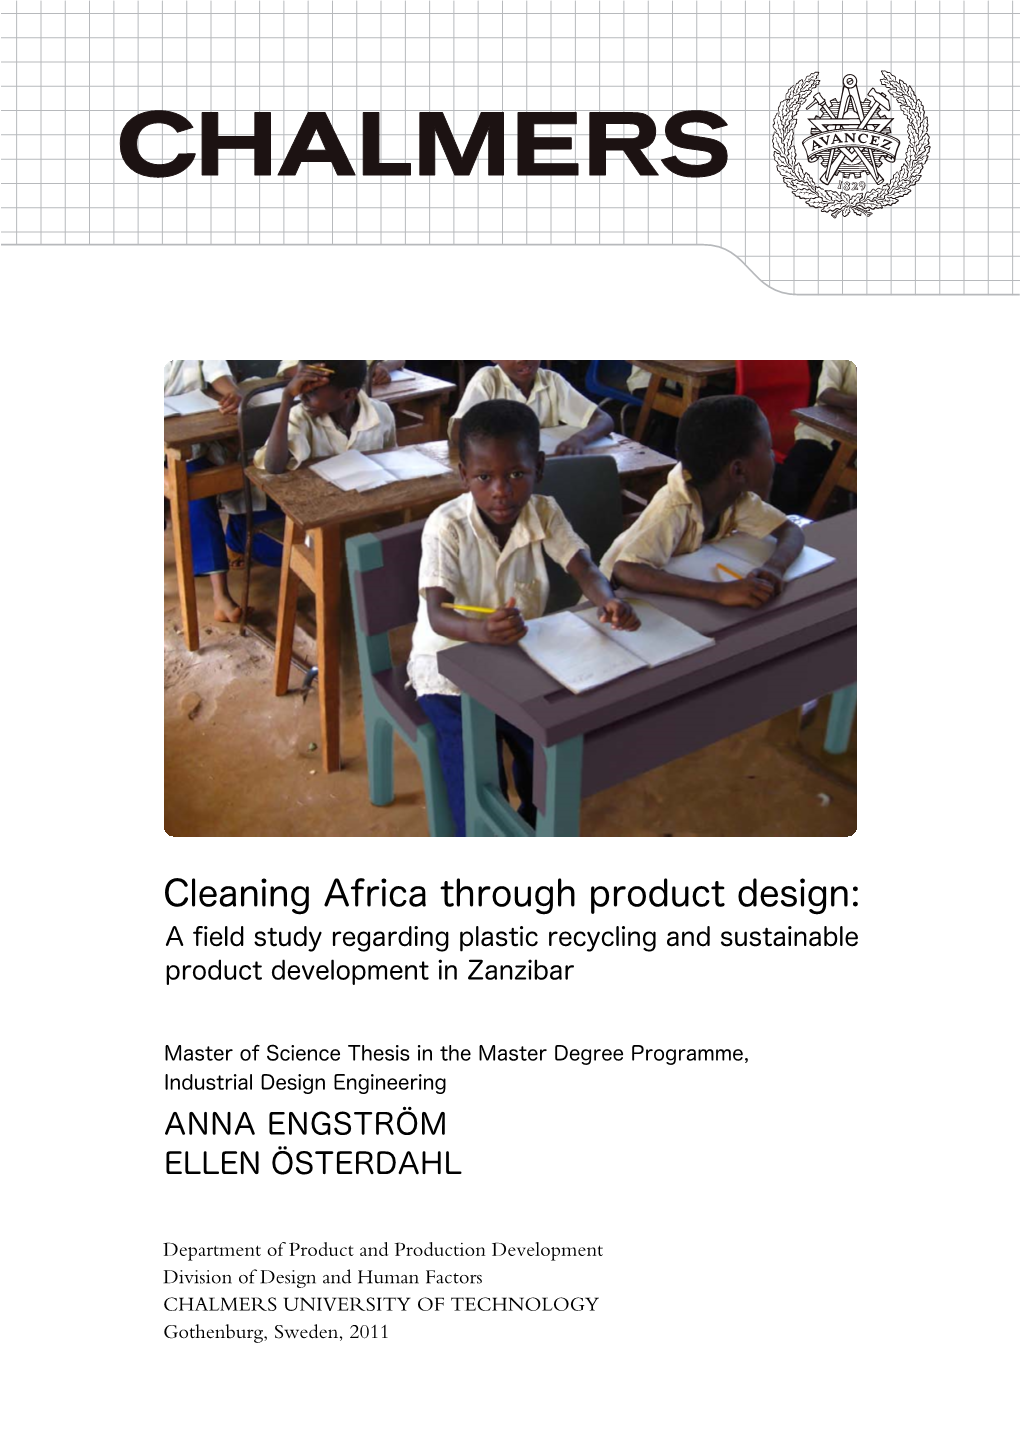 Cleaning Africa Through Product Design: a ﬁeld Study Regarding Plastic Recycling and Sustainable Product Development in Zanzibar